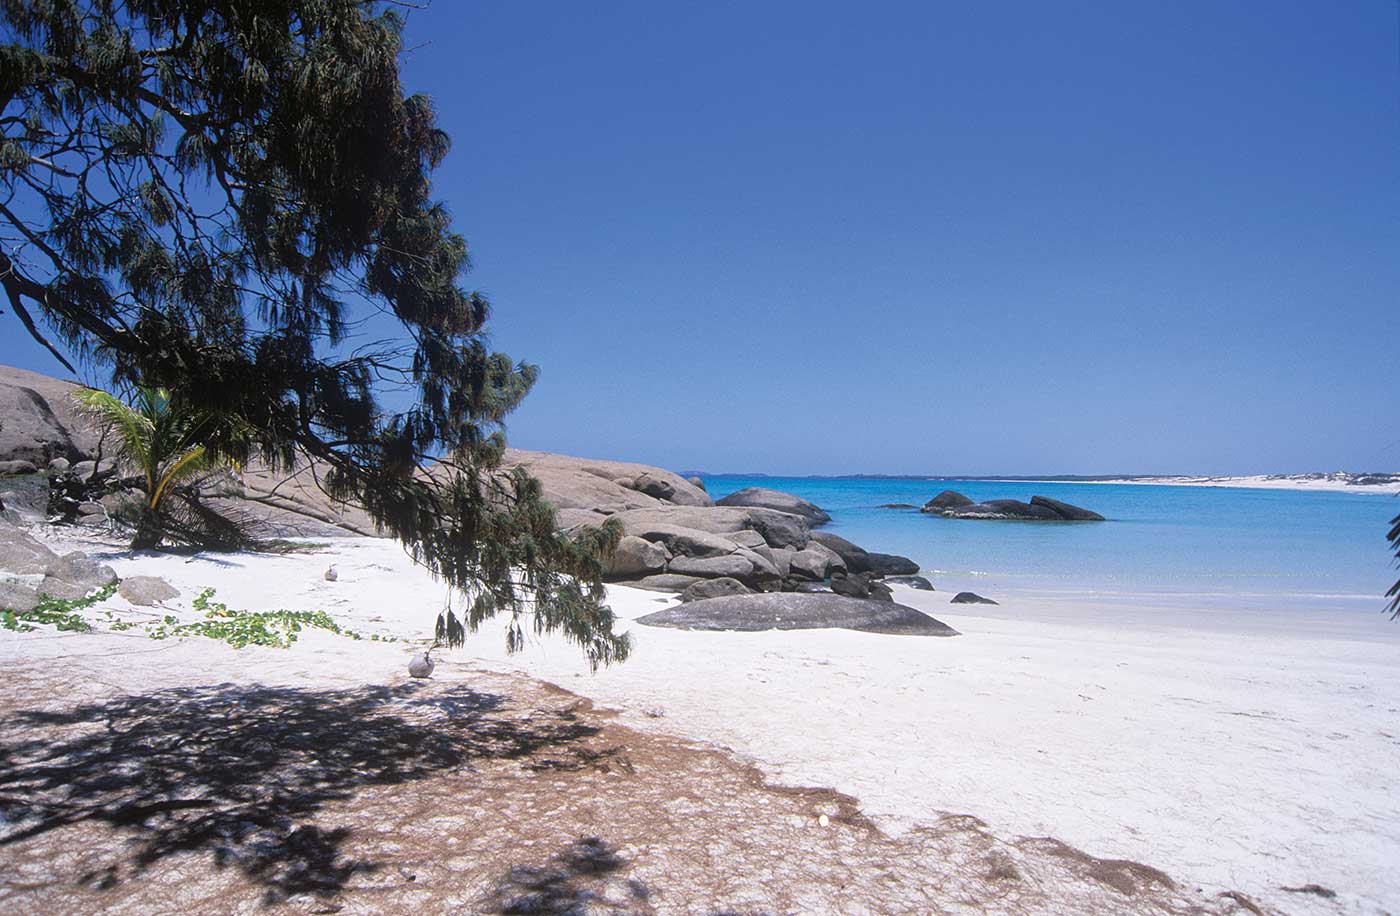 A colour photograph of a beach. At the left of the photograph, part of a tree hangs down toward the sand. In the middle distance are some smooth rocks. Beyond them and to the right is the ocean, with isolated rocks emerging from it. Near the horizon on the right is what appears to be another beach. The clear blue sky dominates the top half of the photograph. 